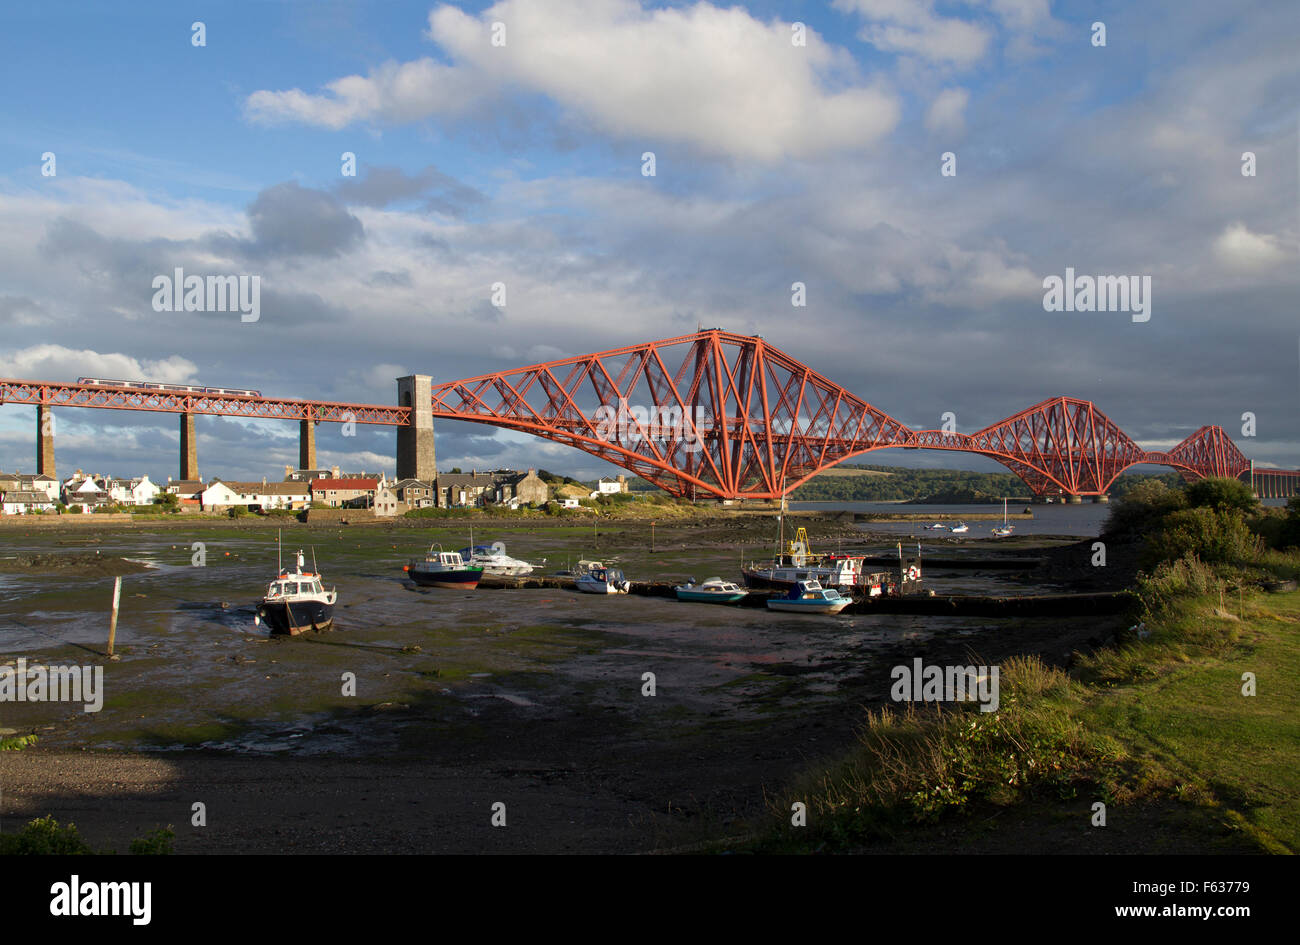 A train crossing the Forth railway bridge over the Firth of Forth in Scotland. Stock Photo